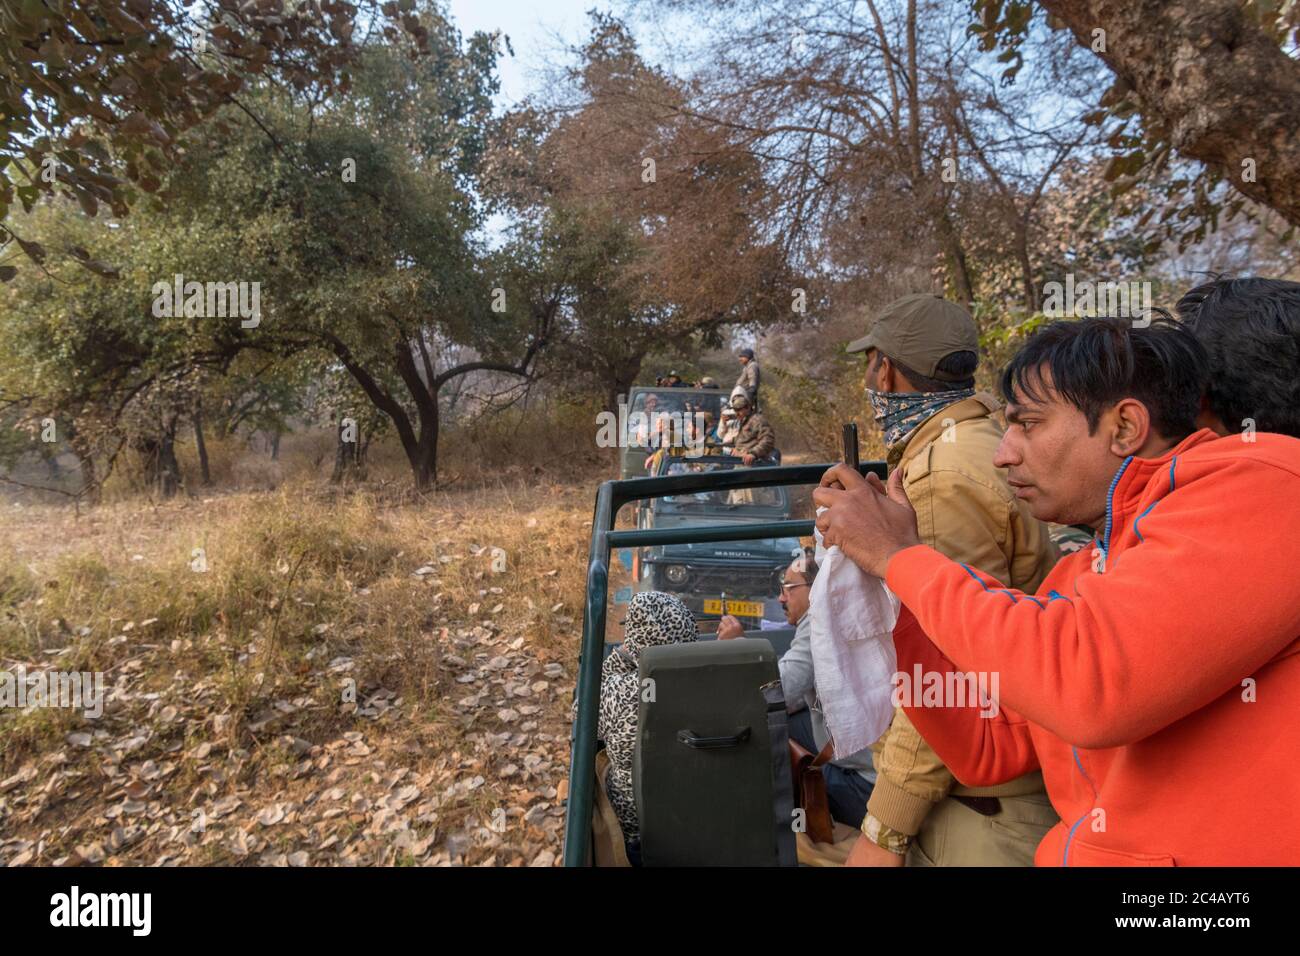 Tourist taking photograph from a Canter safari vehicle on a Tiger Safari in Ranthambore National Park, Rajasthan, India Stock Photo